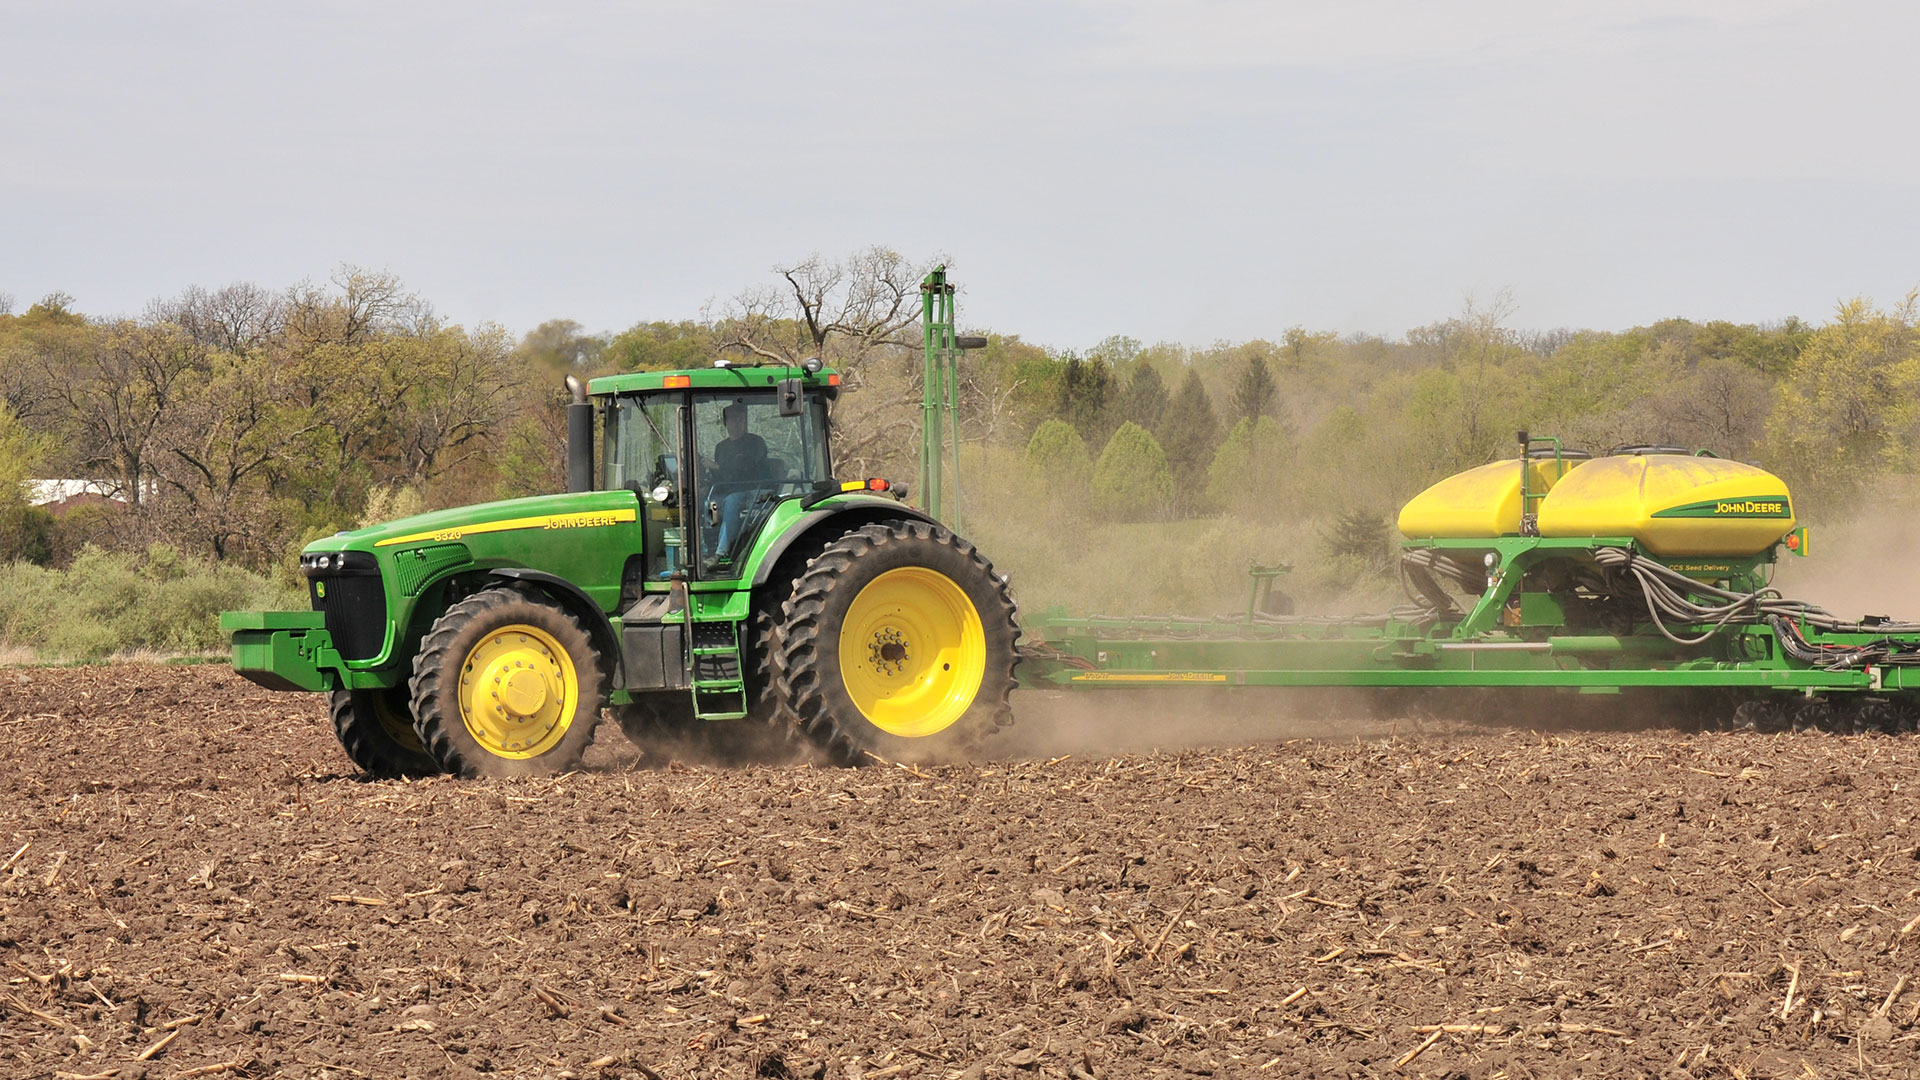 John Deere tractor equipped with LSW tires to reduce power hop and road lope